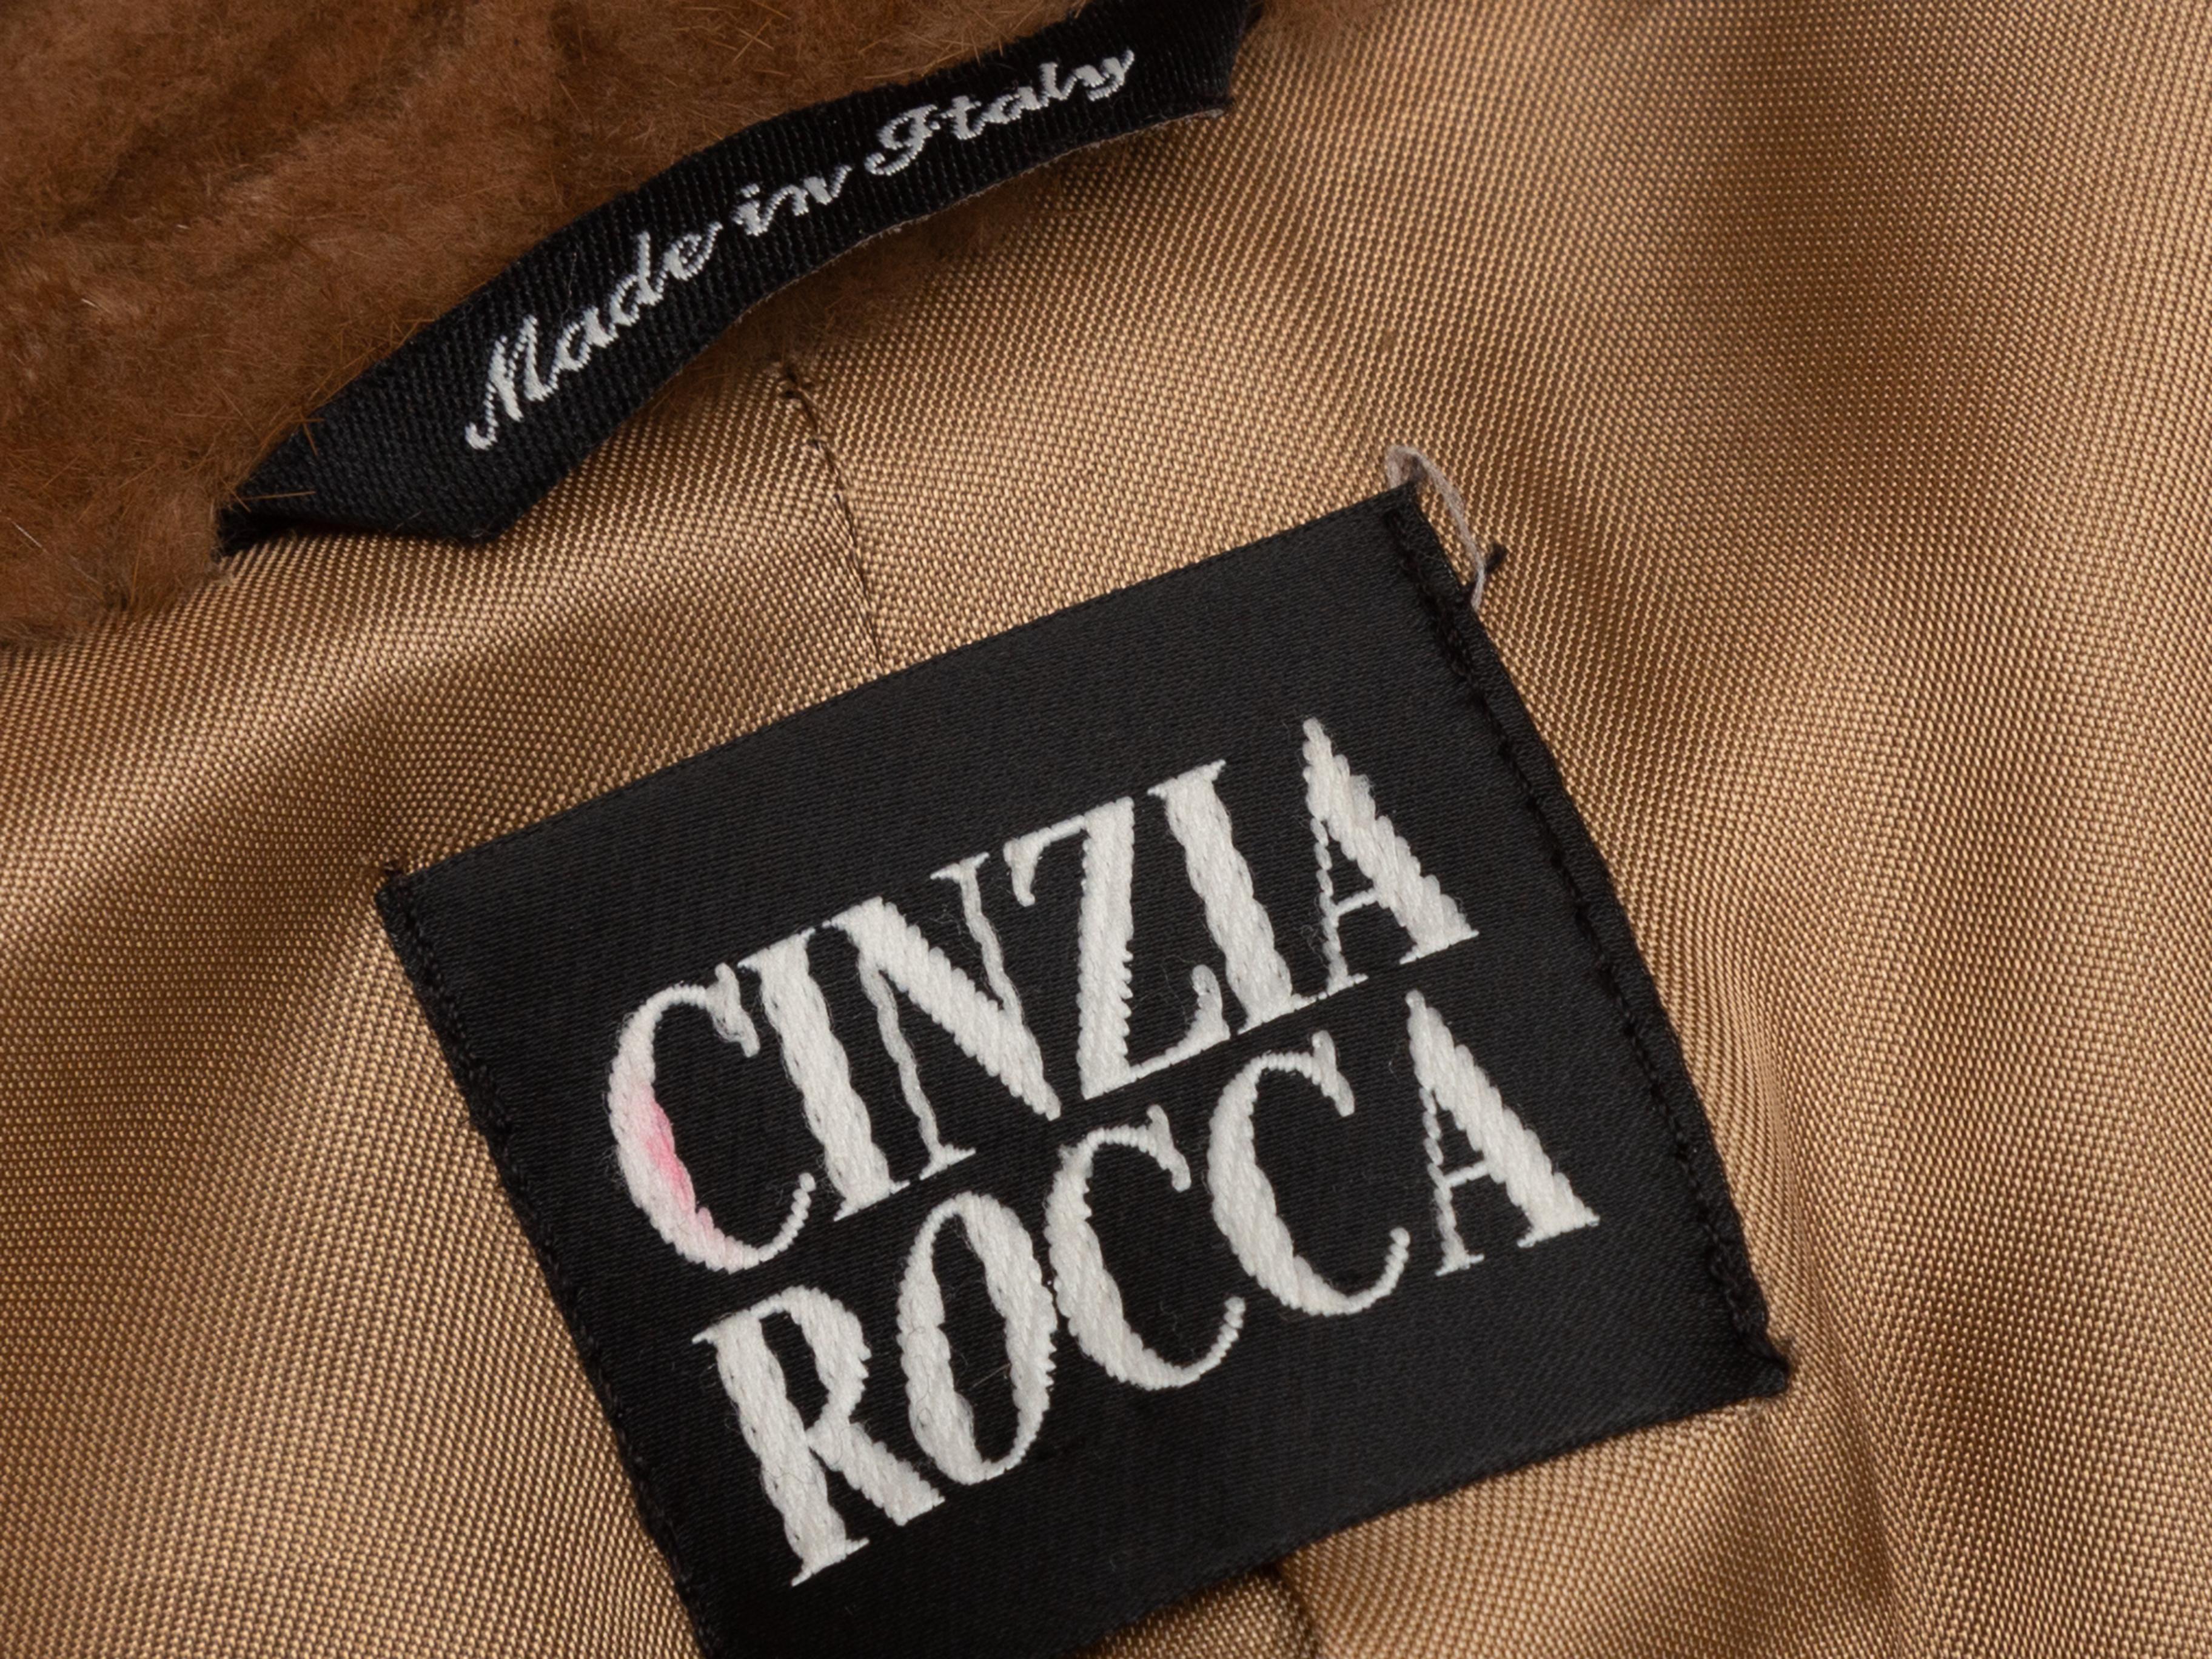 Product details: Tan wool-blend long mink fur-trimmed coat by Cinzia Rocca. Shawl collar. Dual hip pockets. Tie closure at waist. 37